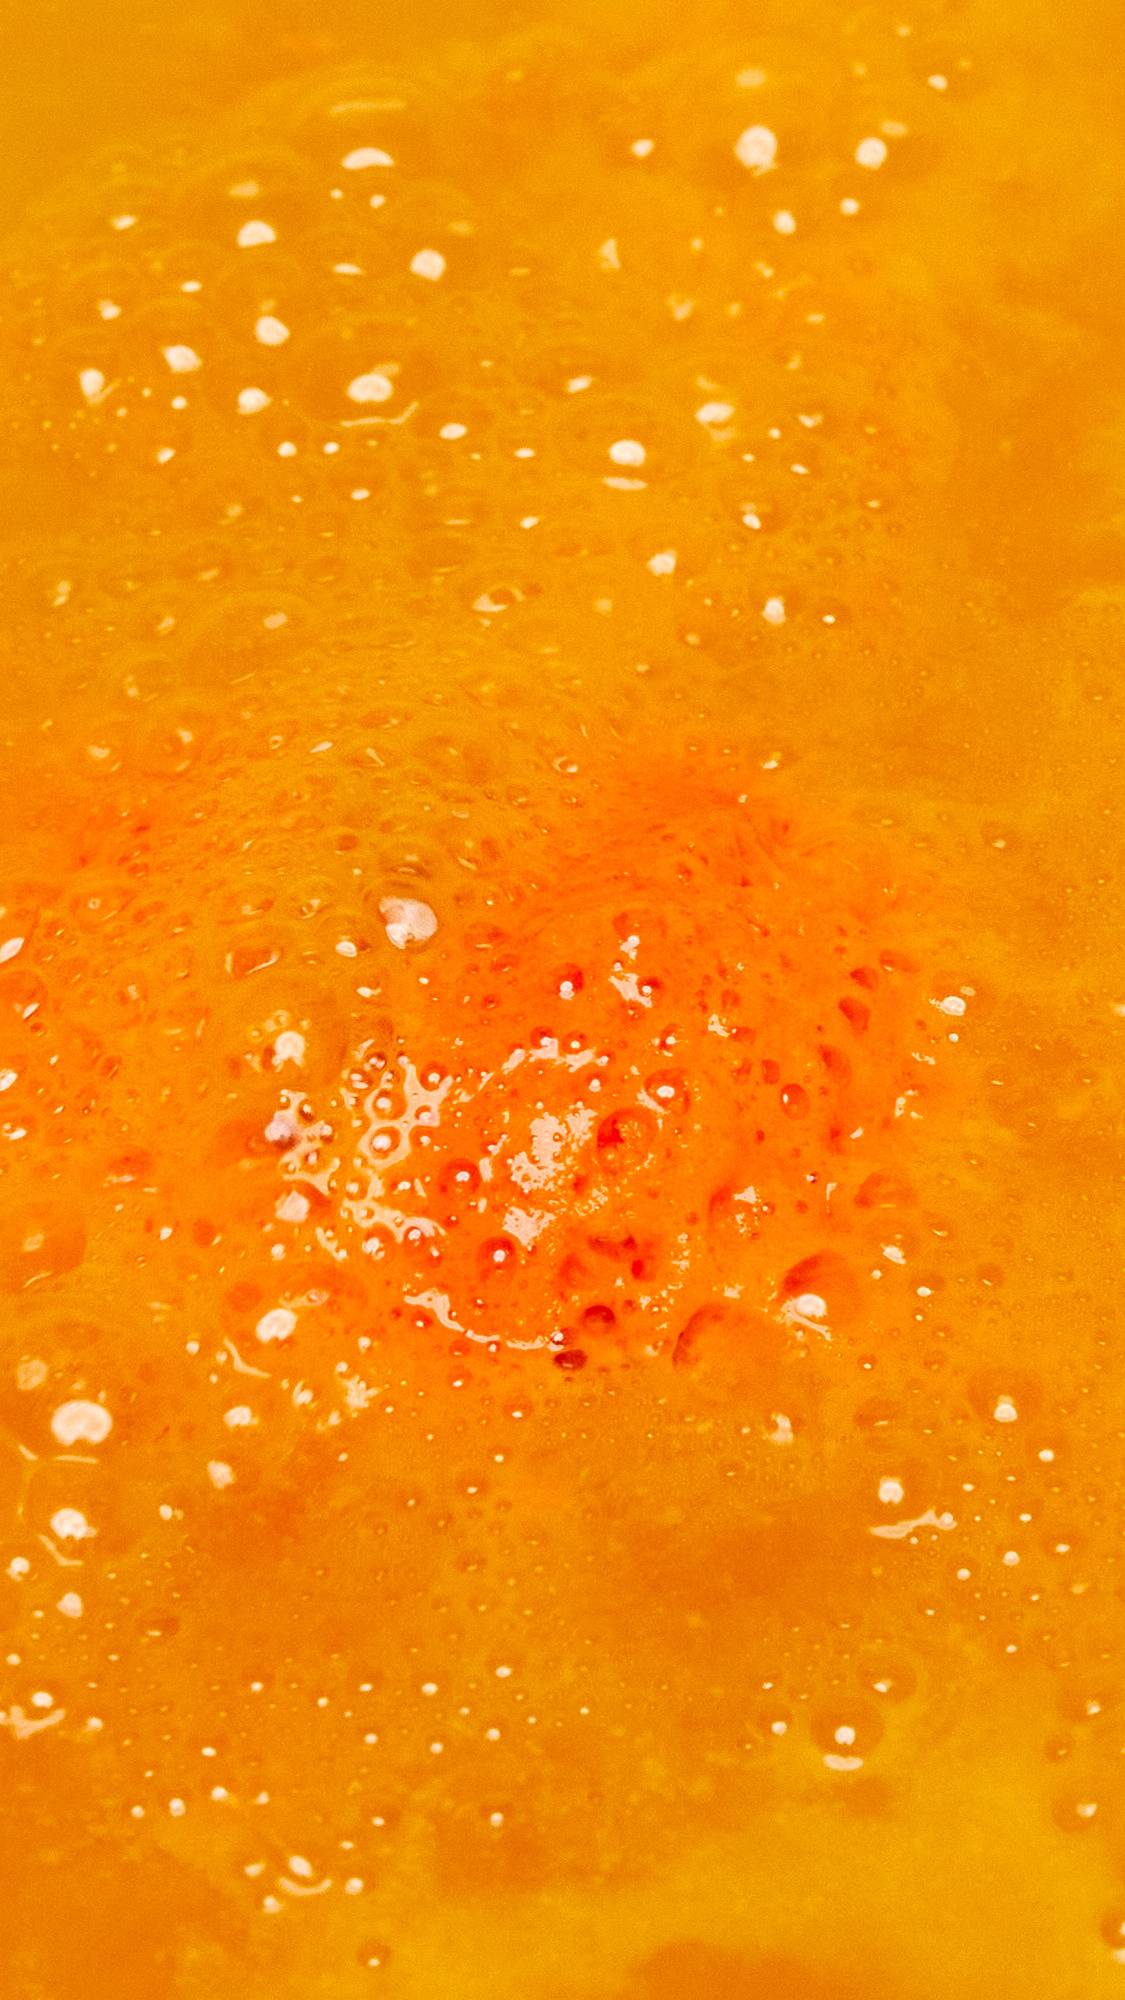 The One With The Orange Slices is slowly dissolving in the bath creating a thick, bubbly blanket of bright orange foam.